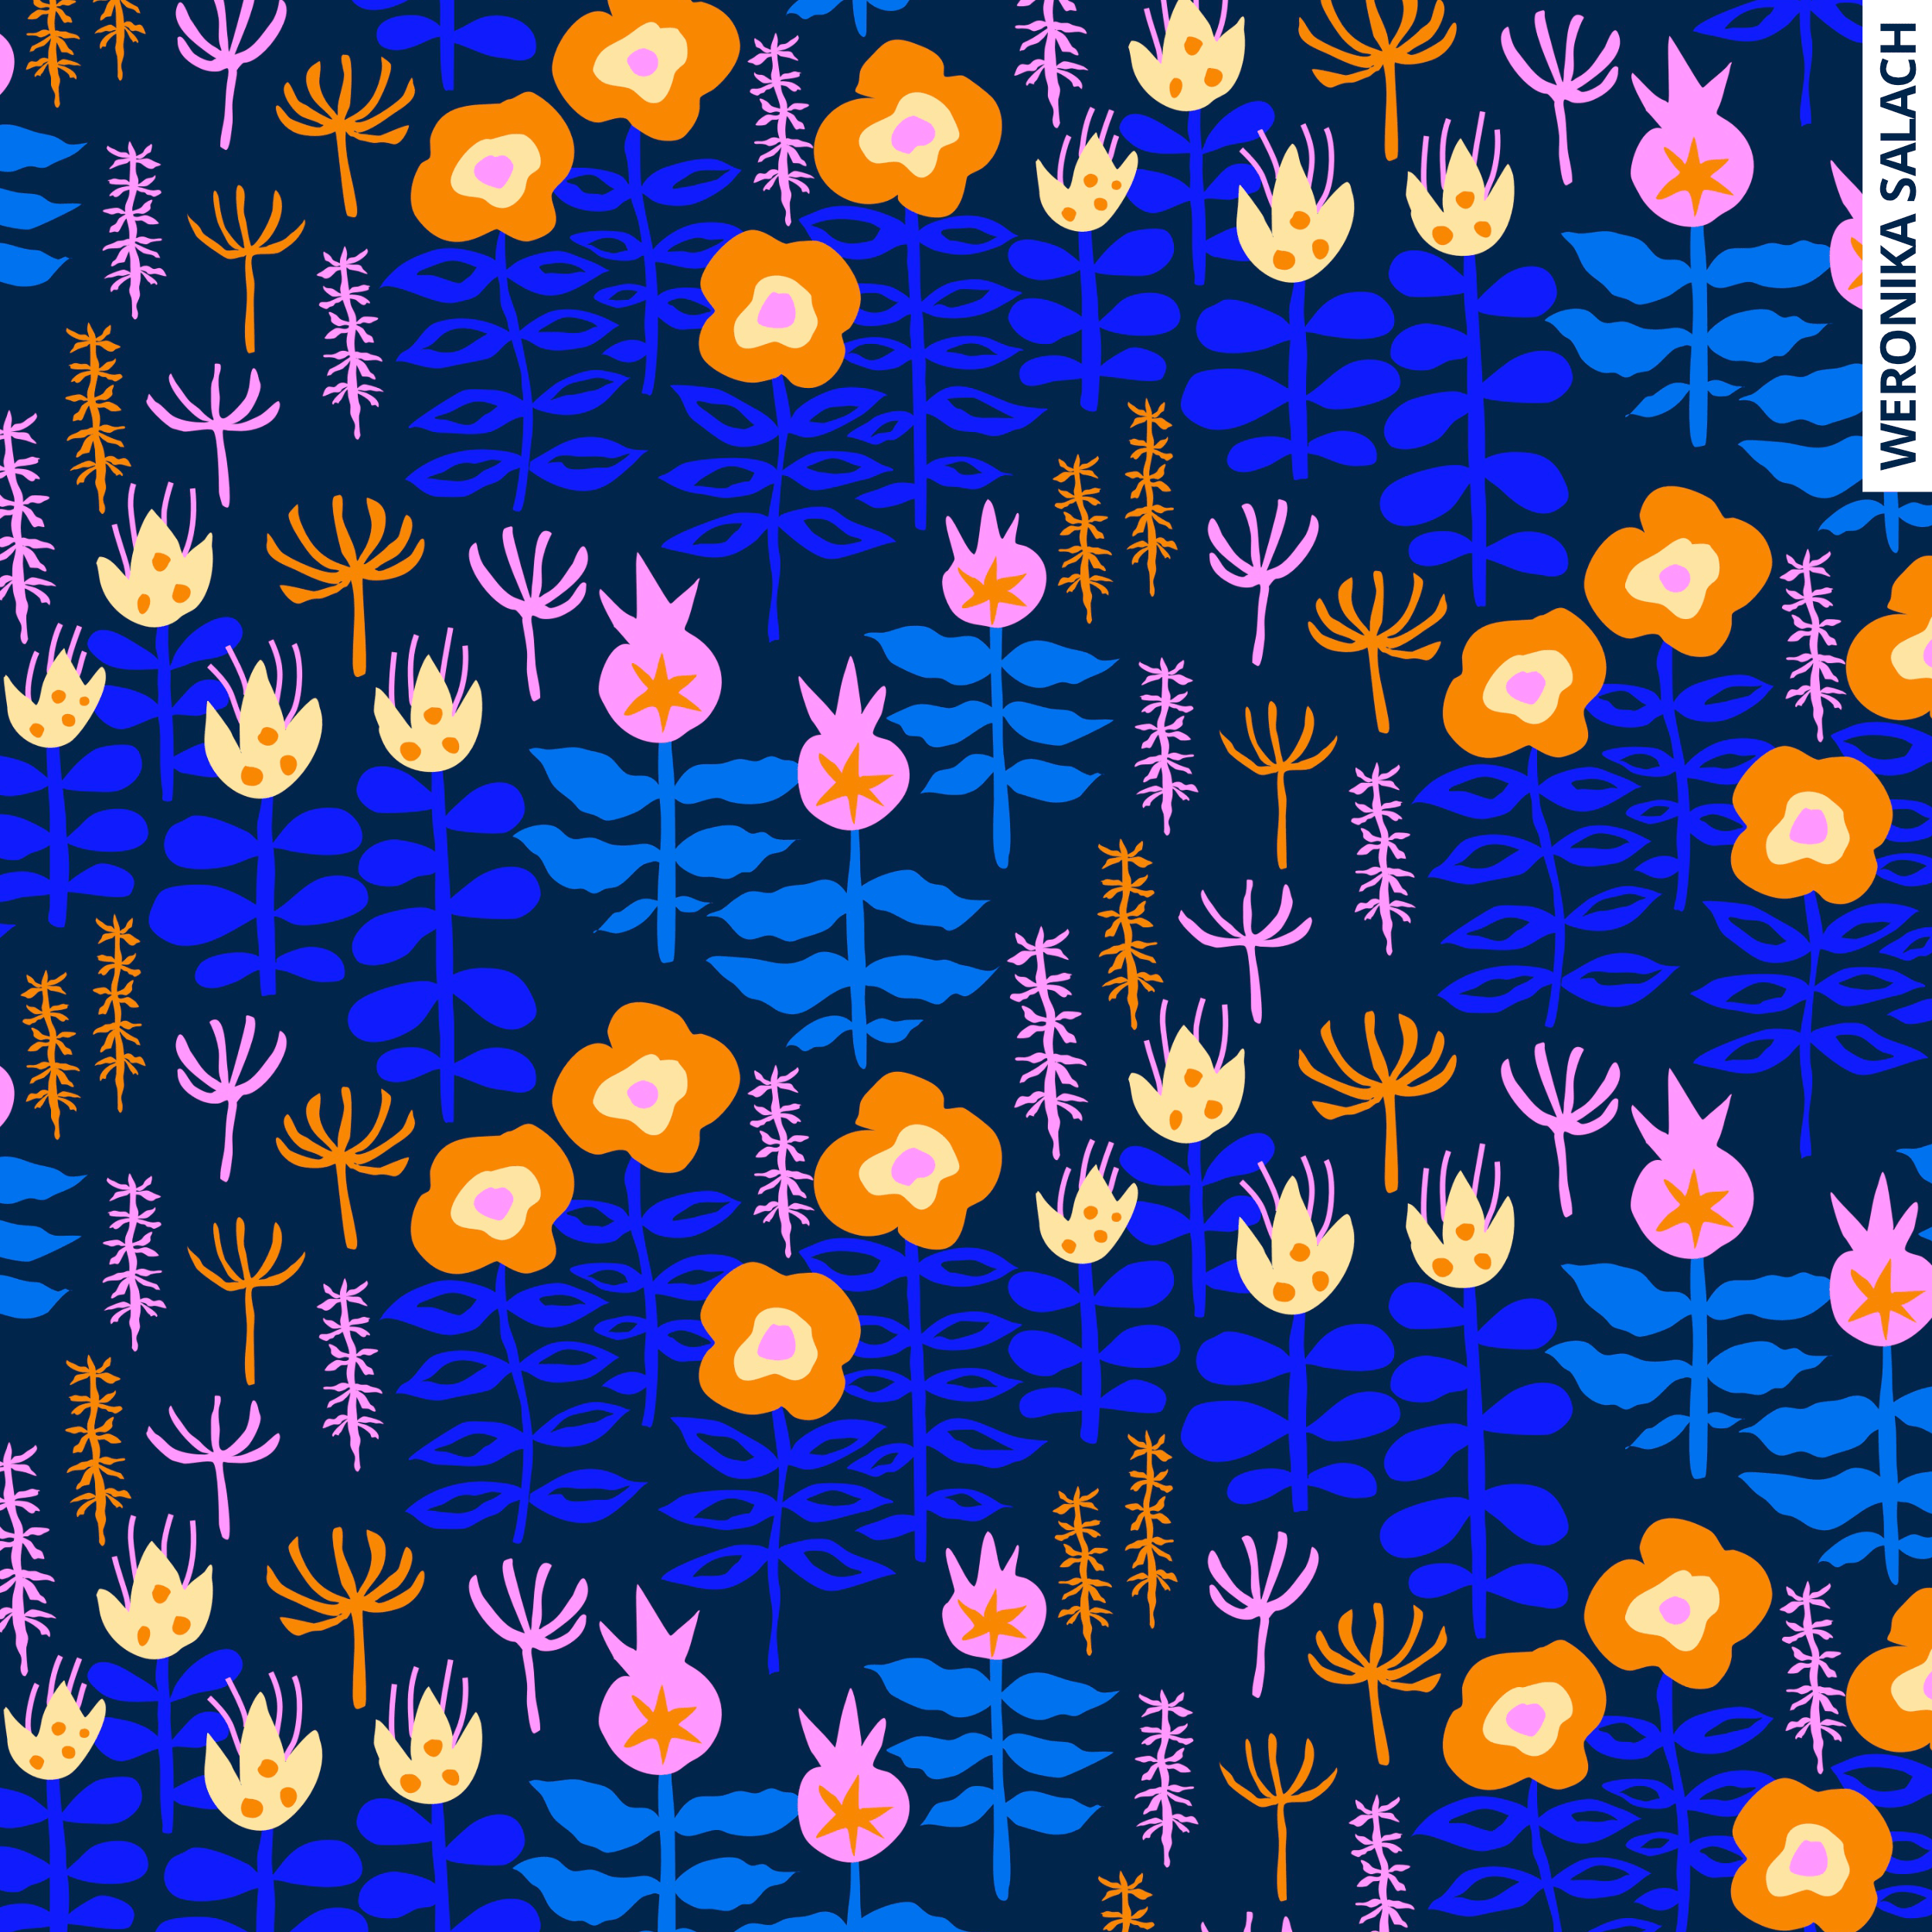 WS_repeat pattern_scandi floral forest.png